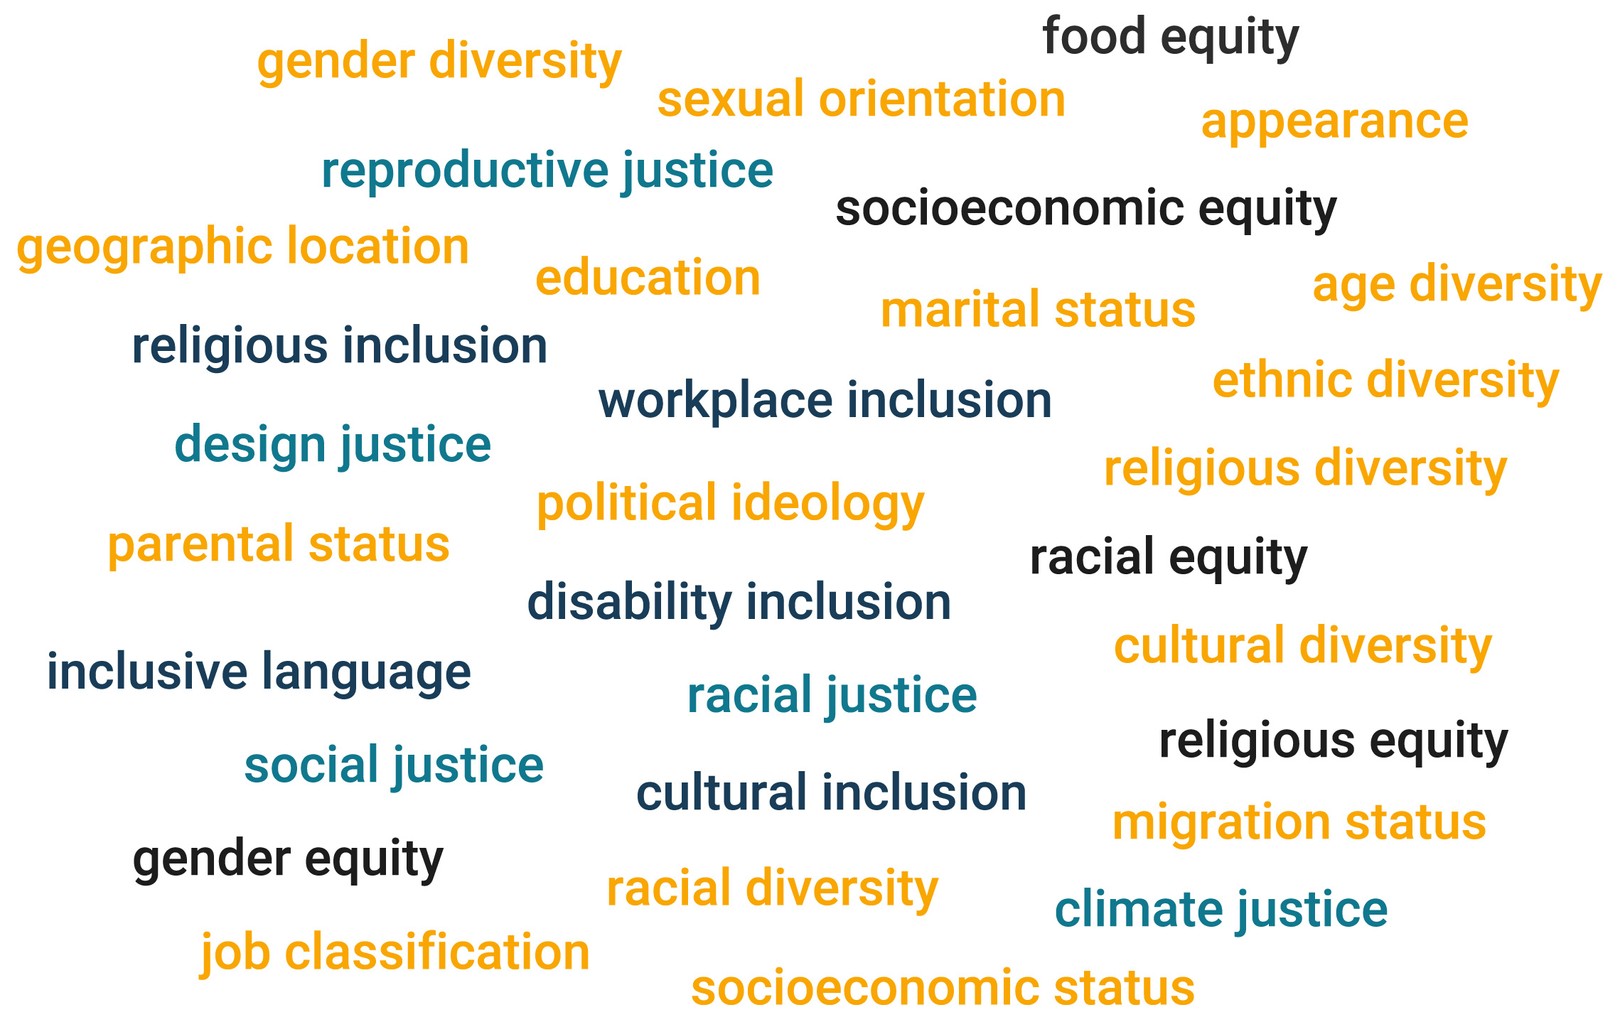 a word cloud showing different terms related to justice, equity, diversity, and inclusion (like racial justice, socioeconomic equity, religious diversity, disability inclusion)